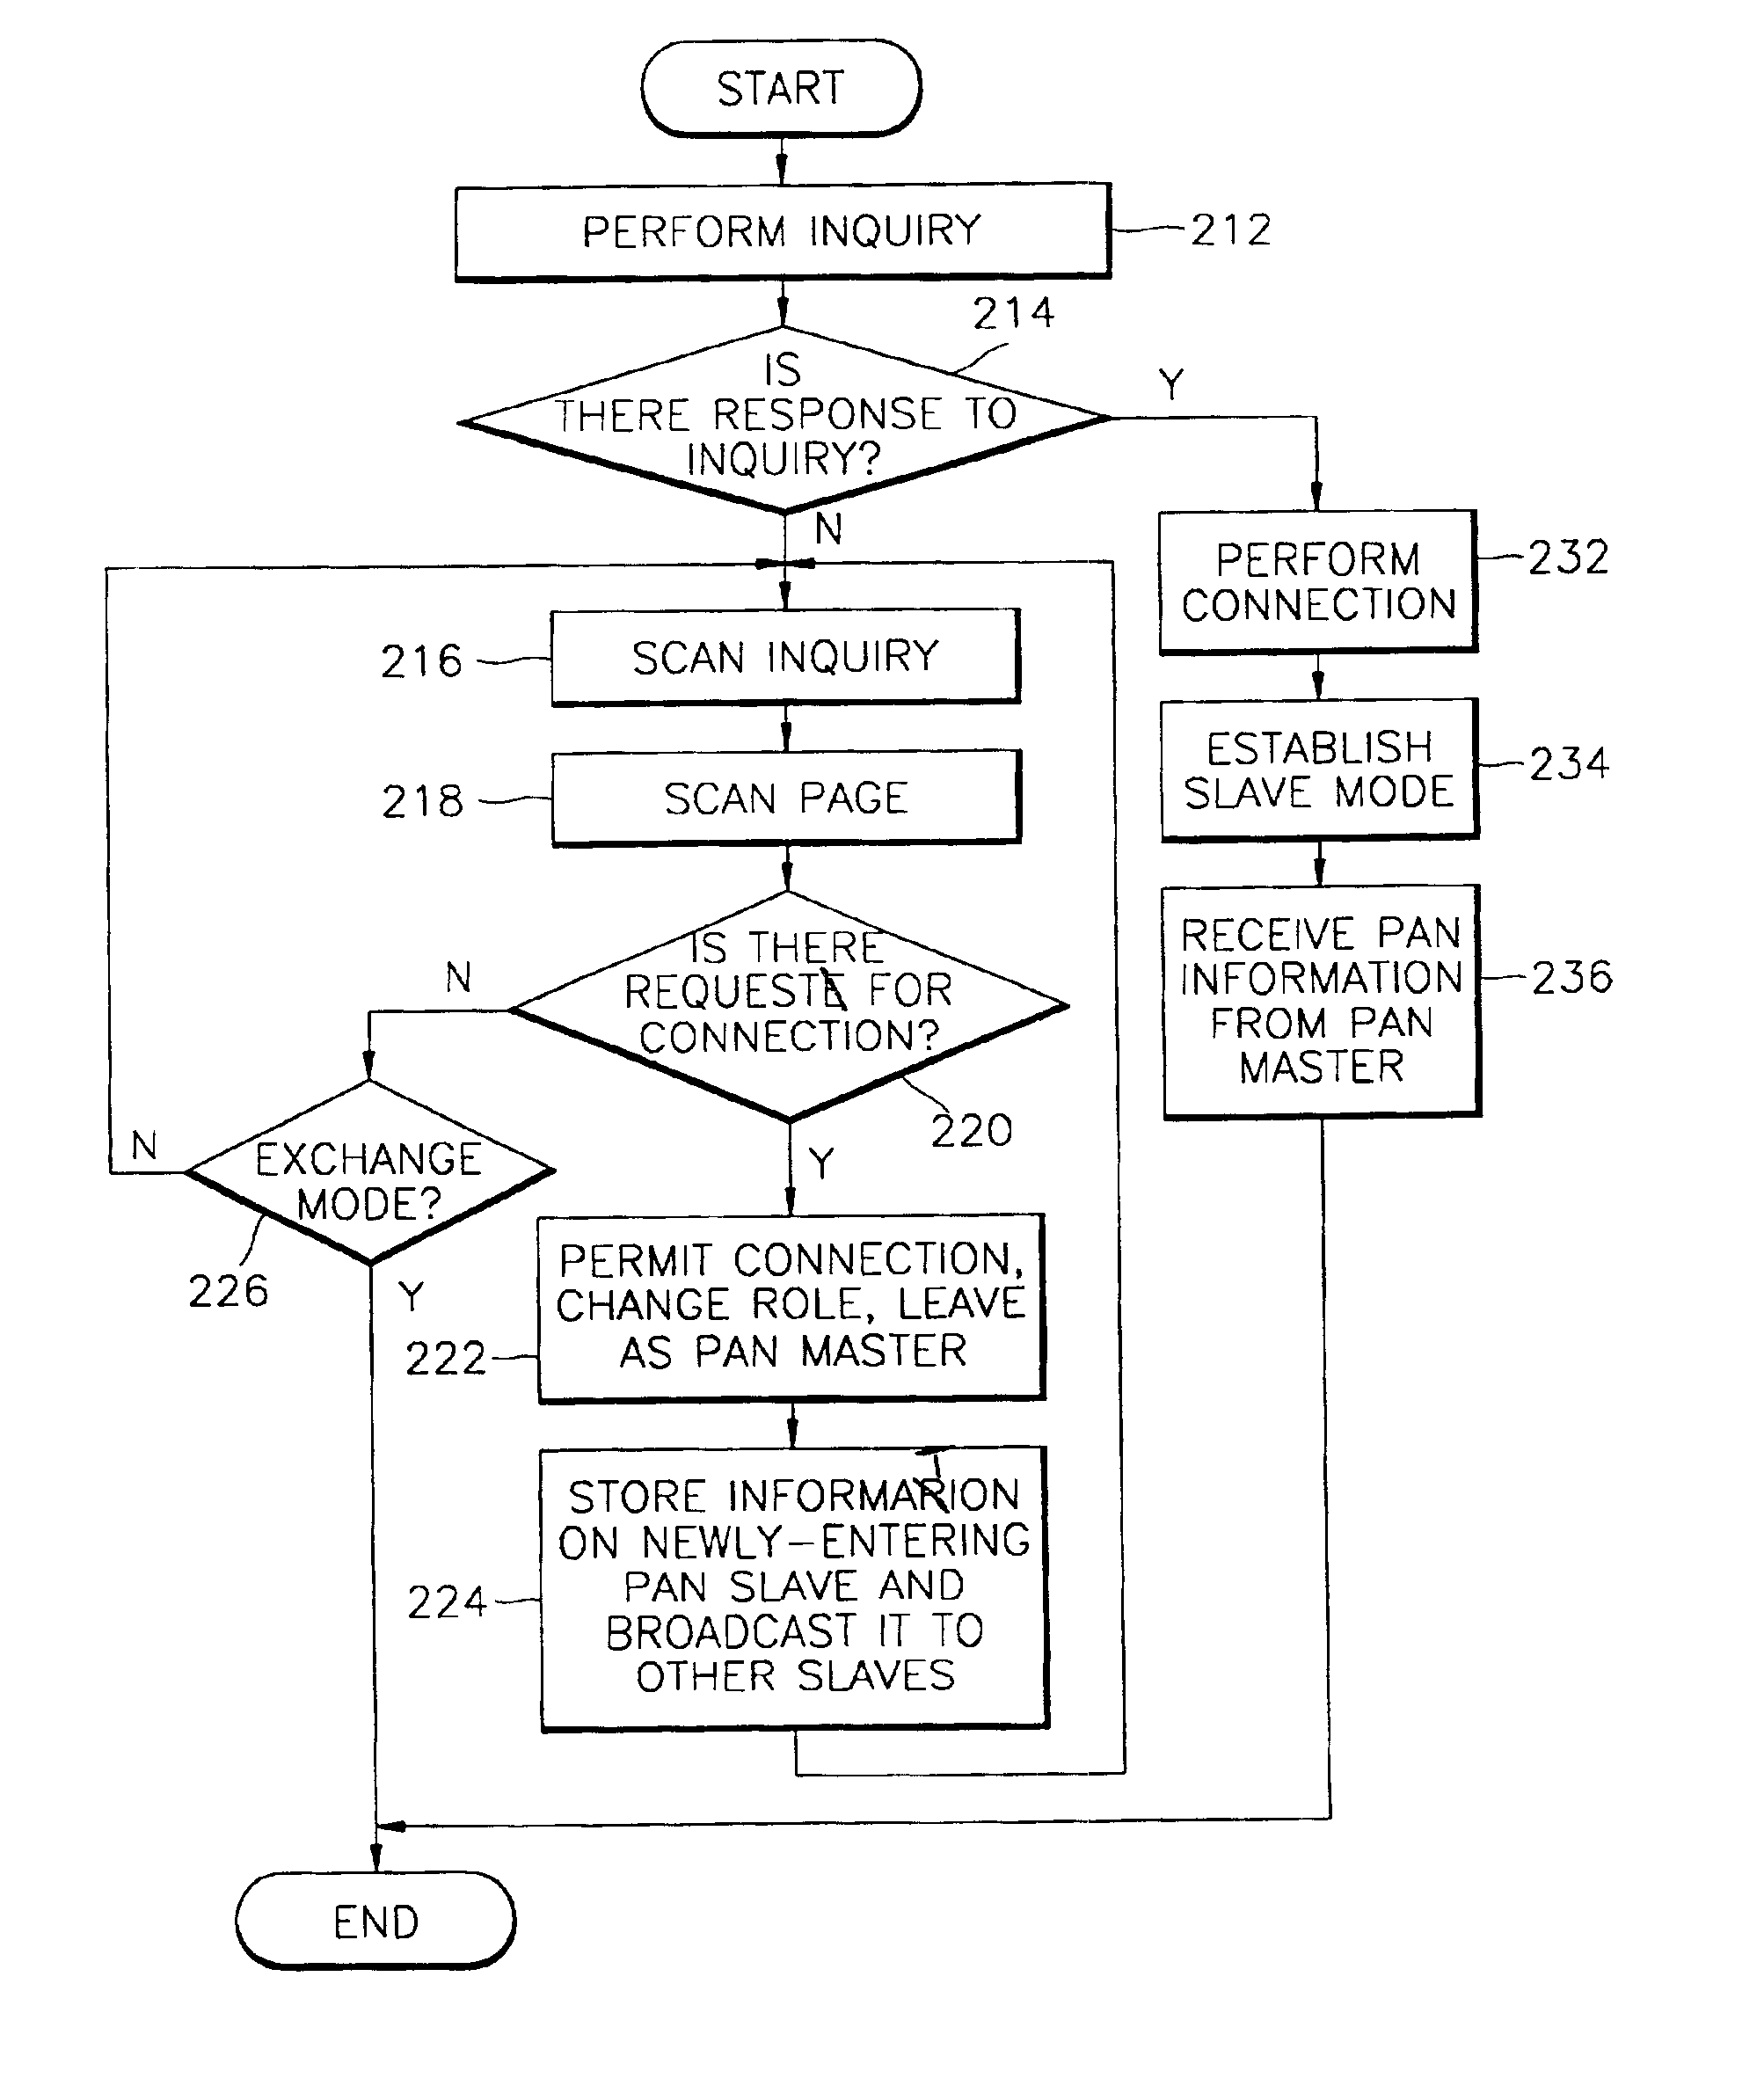 Method for operating personal ad-hoc network (PAN) among bluetooth devices